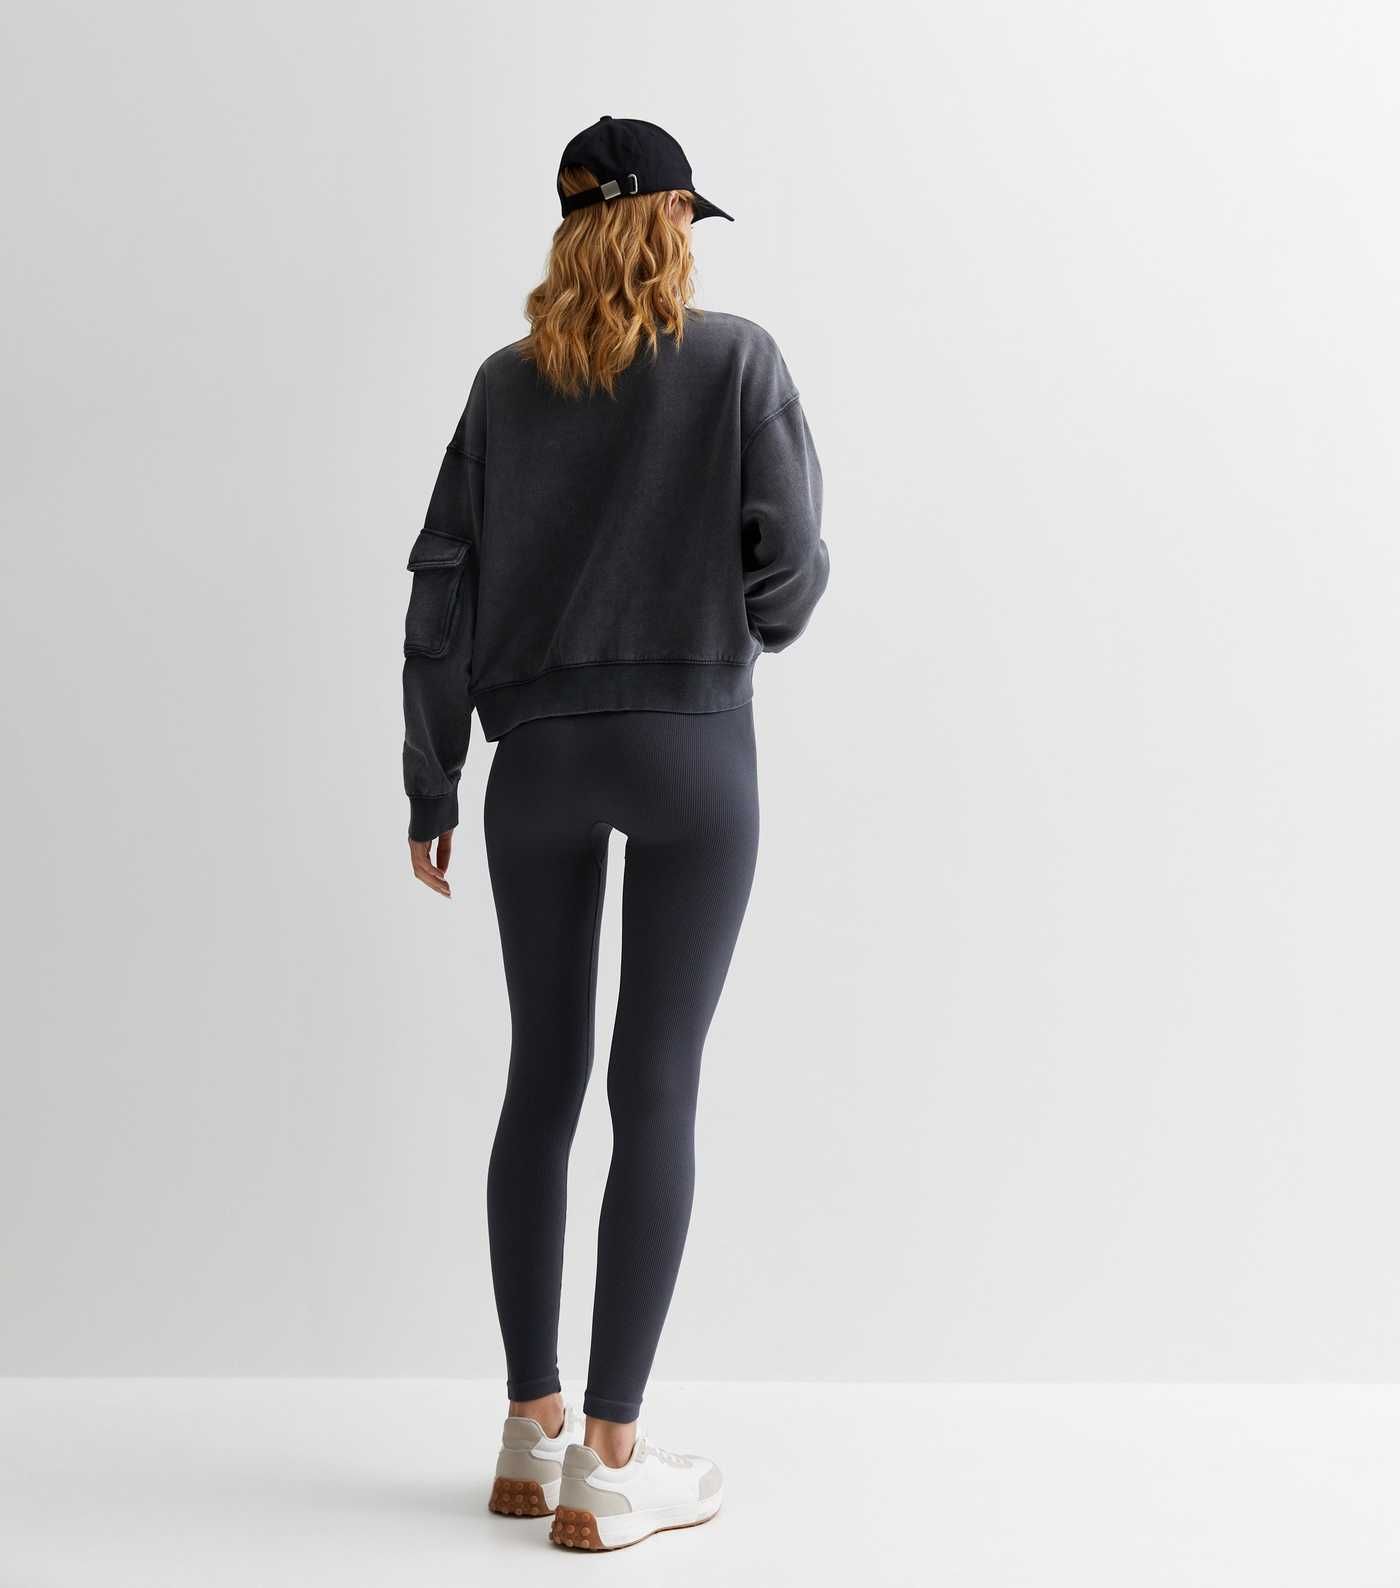 Dark Grey Seamless Leggings
						
						Add to Saved Items
						Remove from Saved Items | New Look (UK)